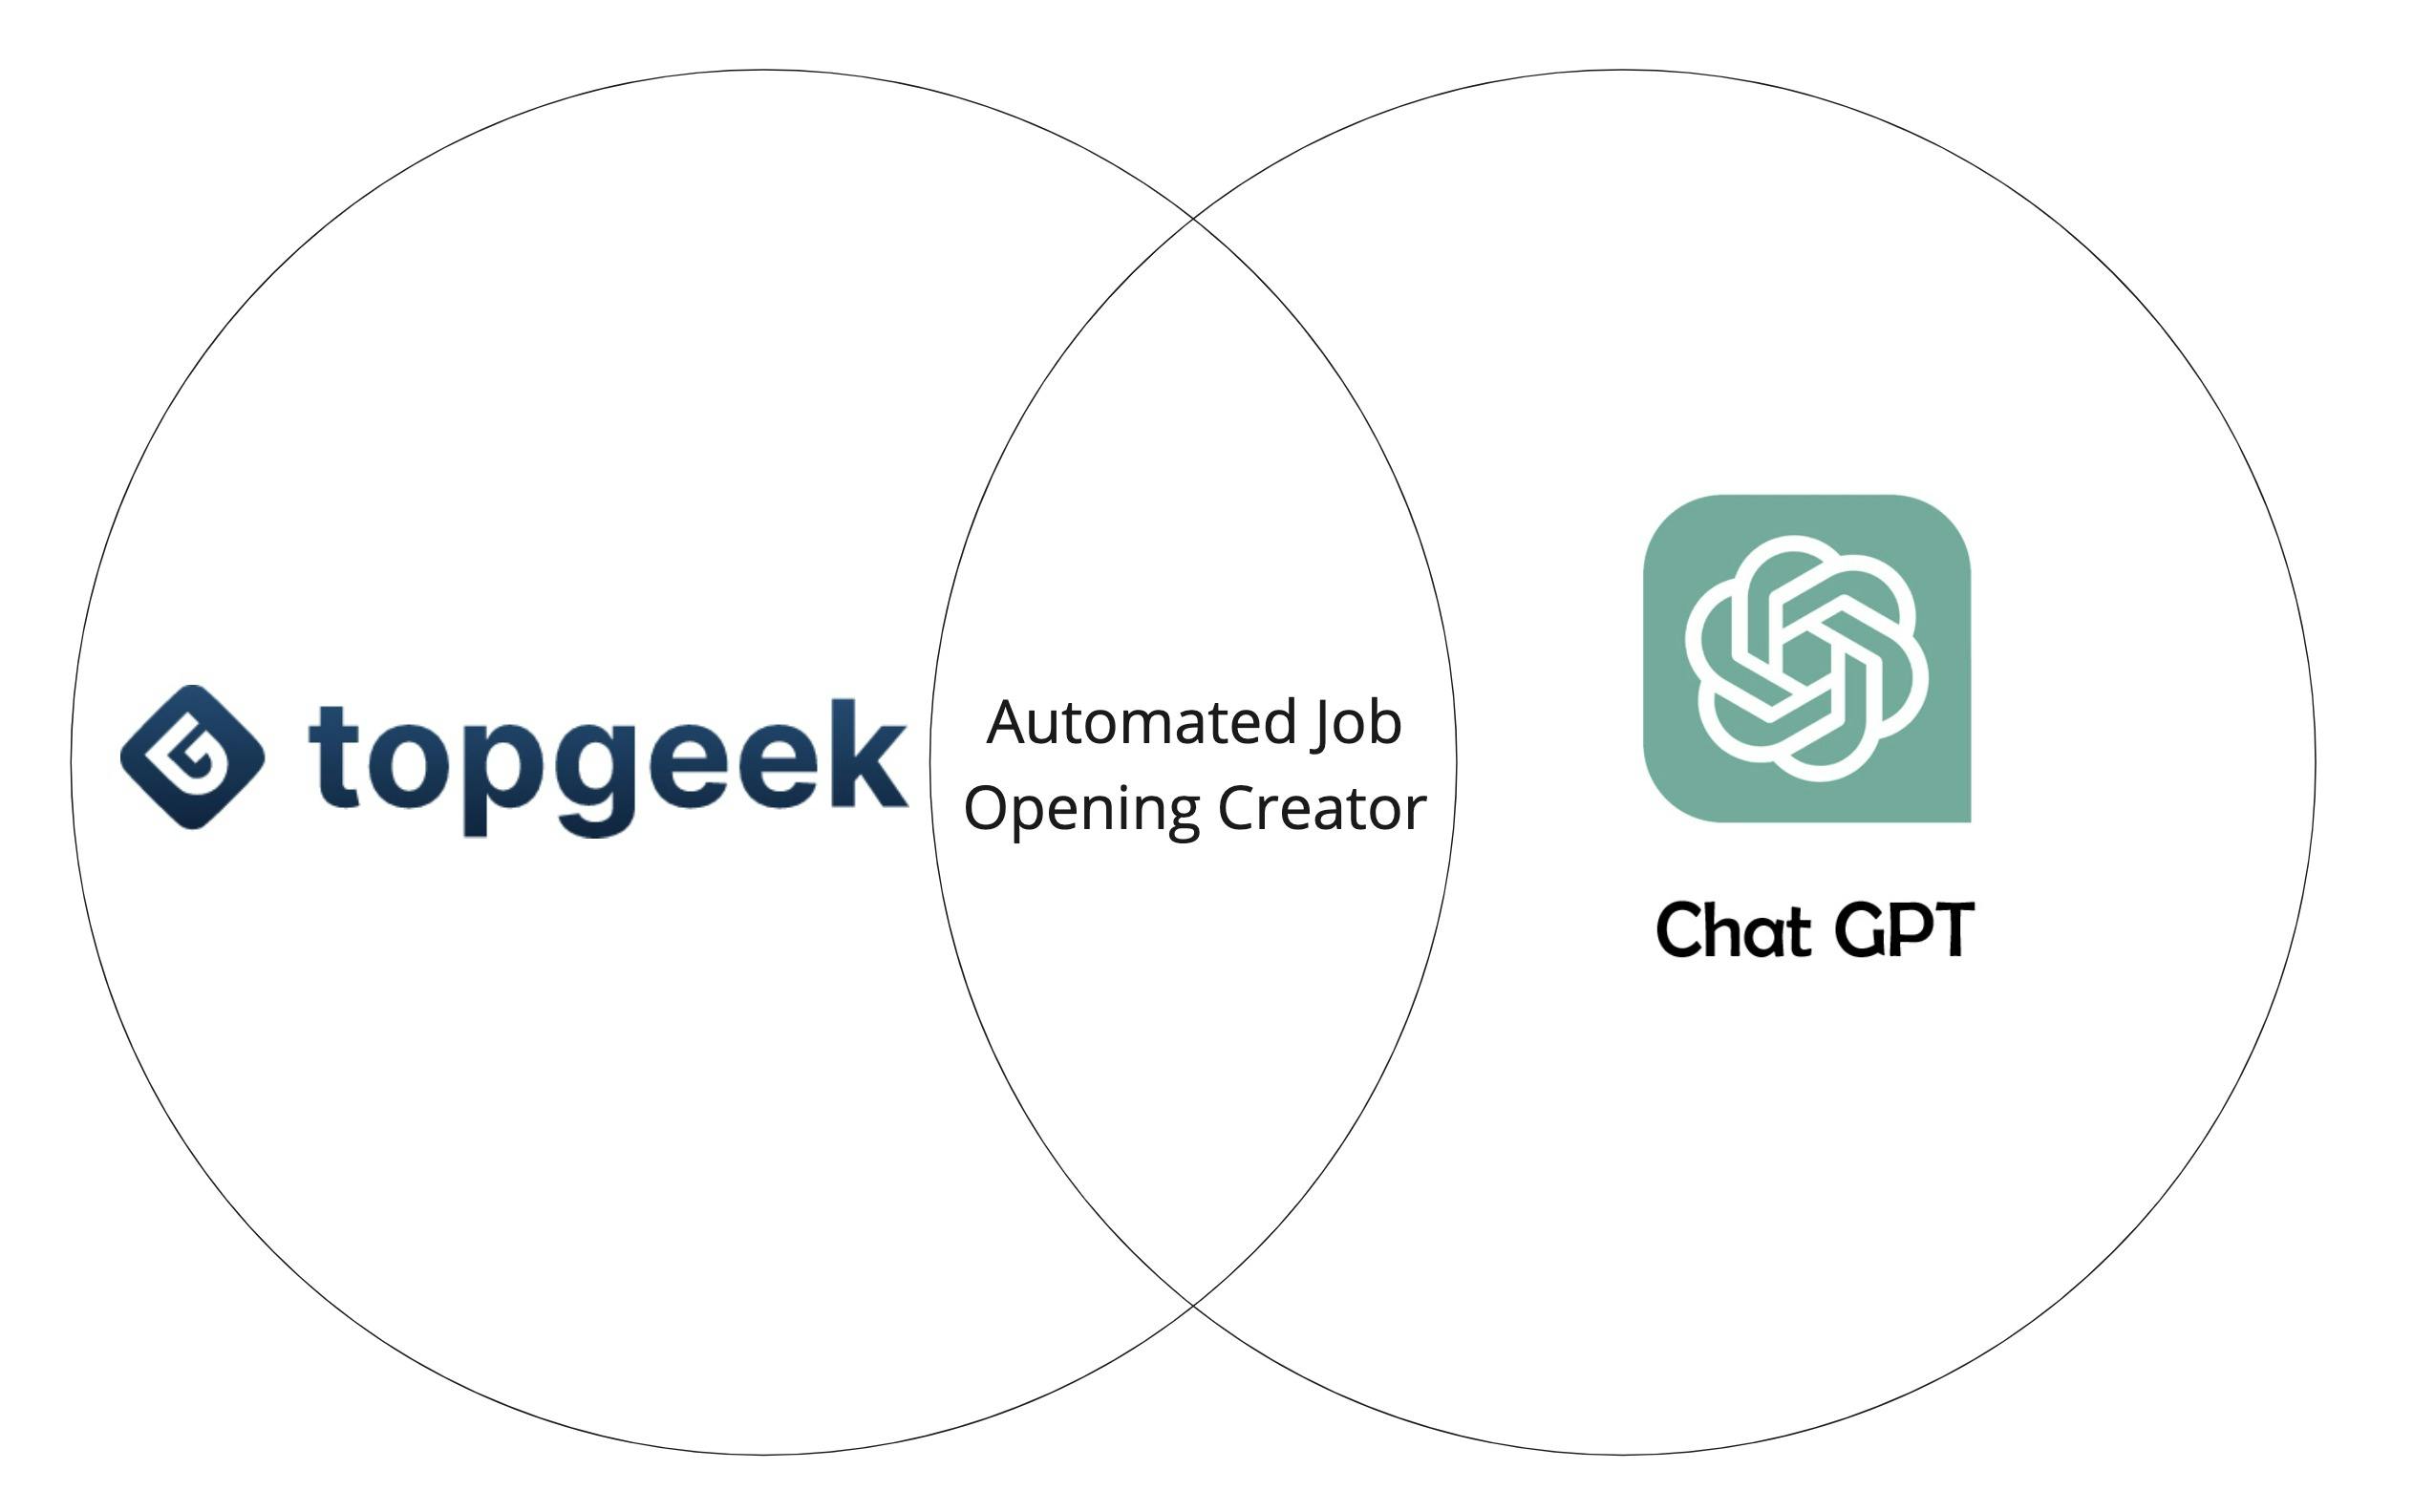 Automating Job Opening Creation in topgeek with ChatGPT